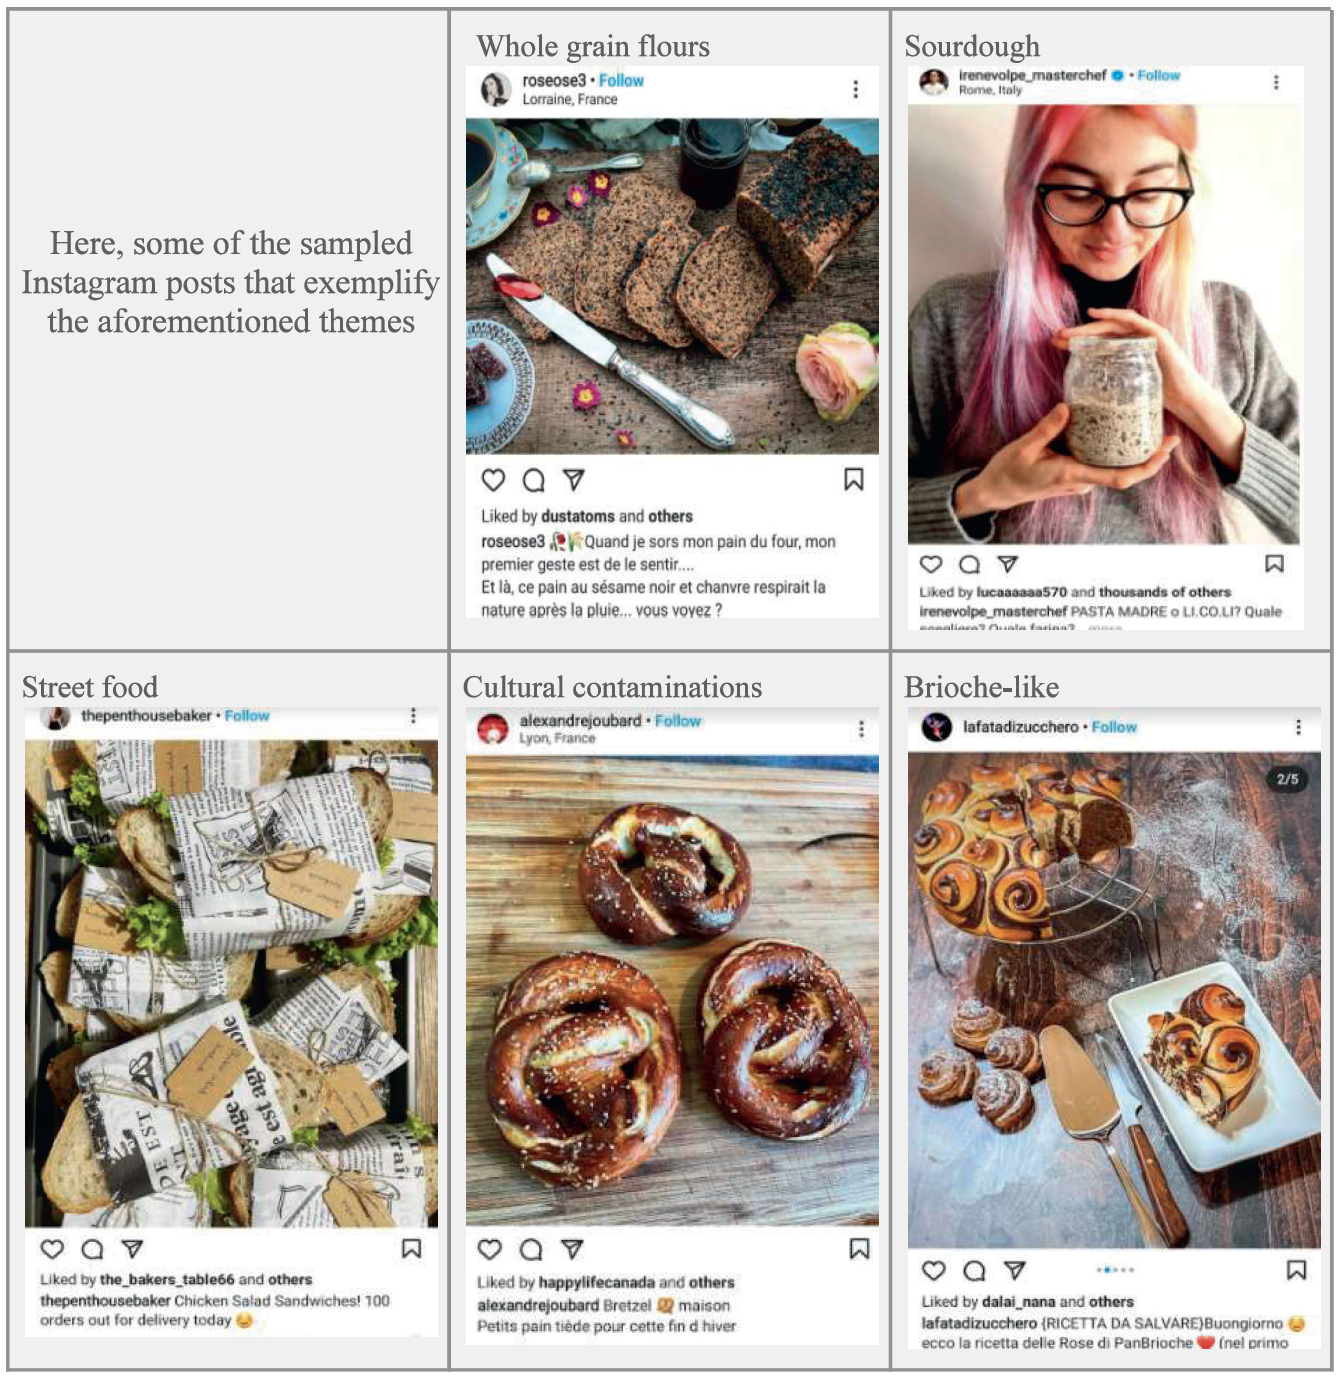 Themes that can be identified through social listening on Instagram